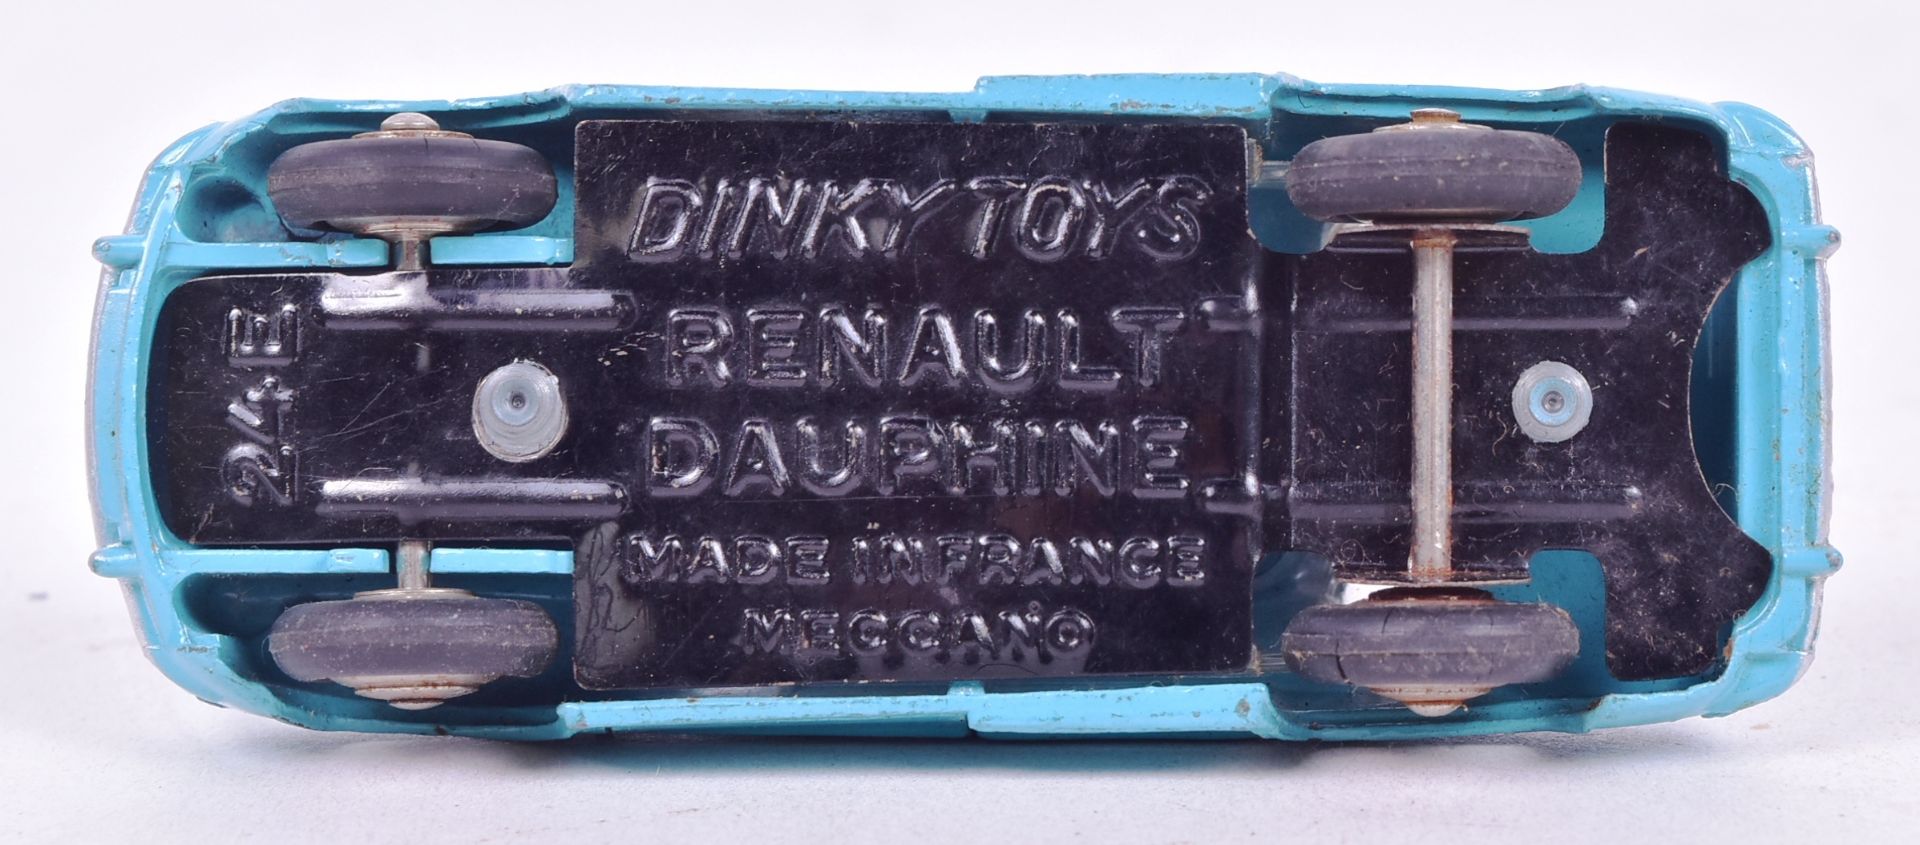 DIECAST - FRENCH DINKY TOYS - RENAULT DAUPHINE - Image 4 of 5